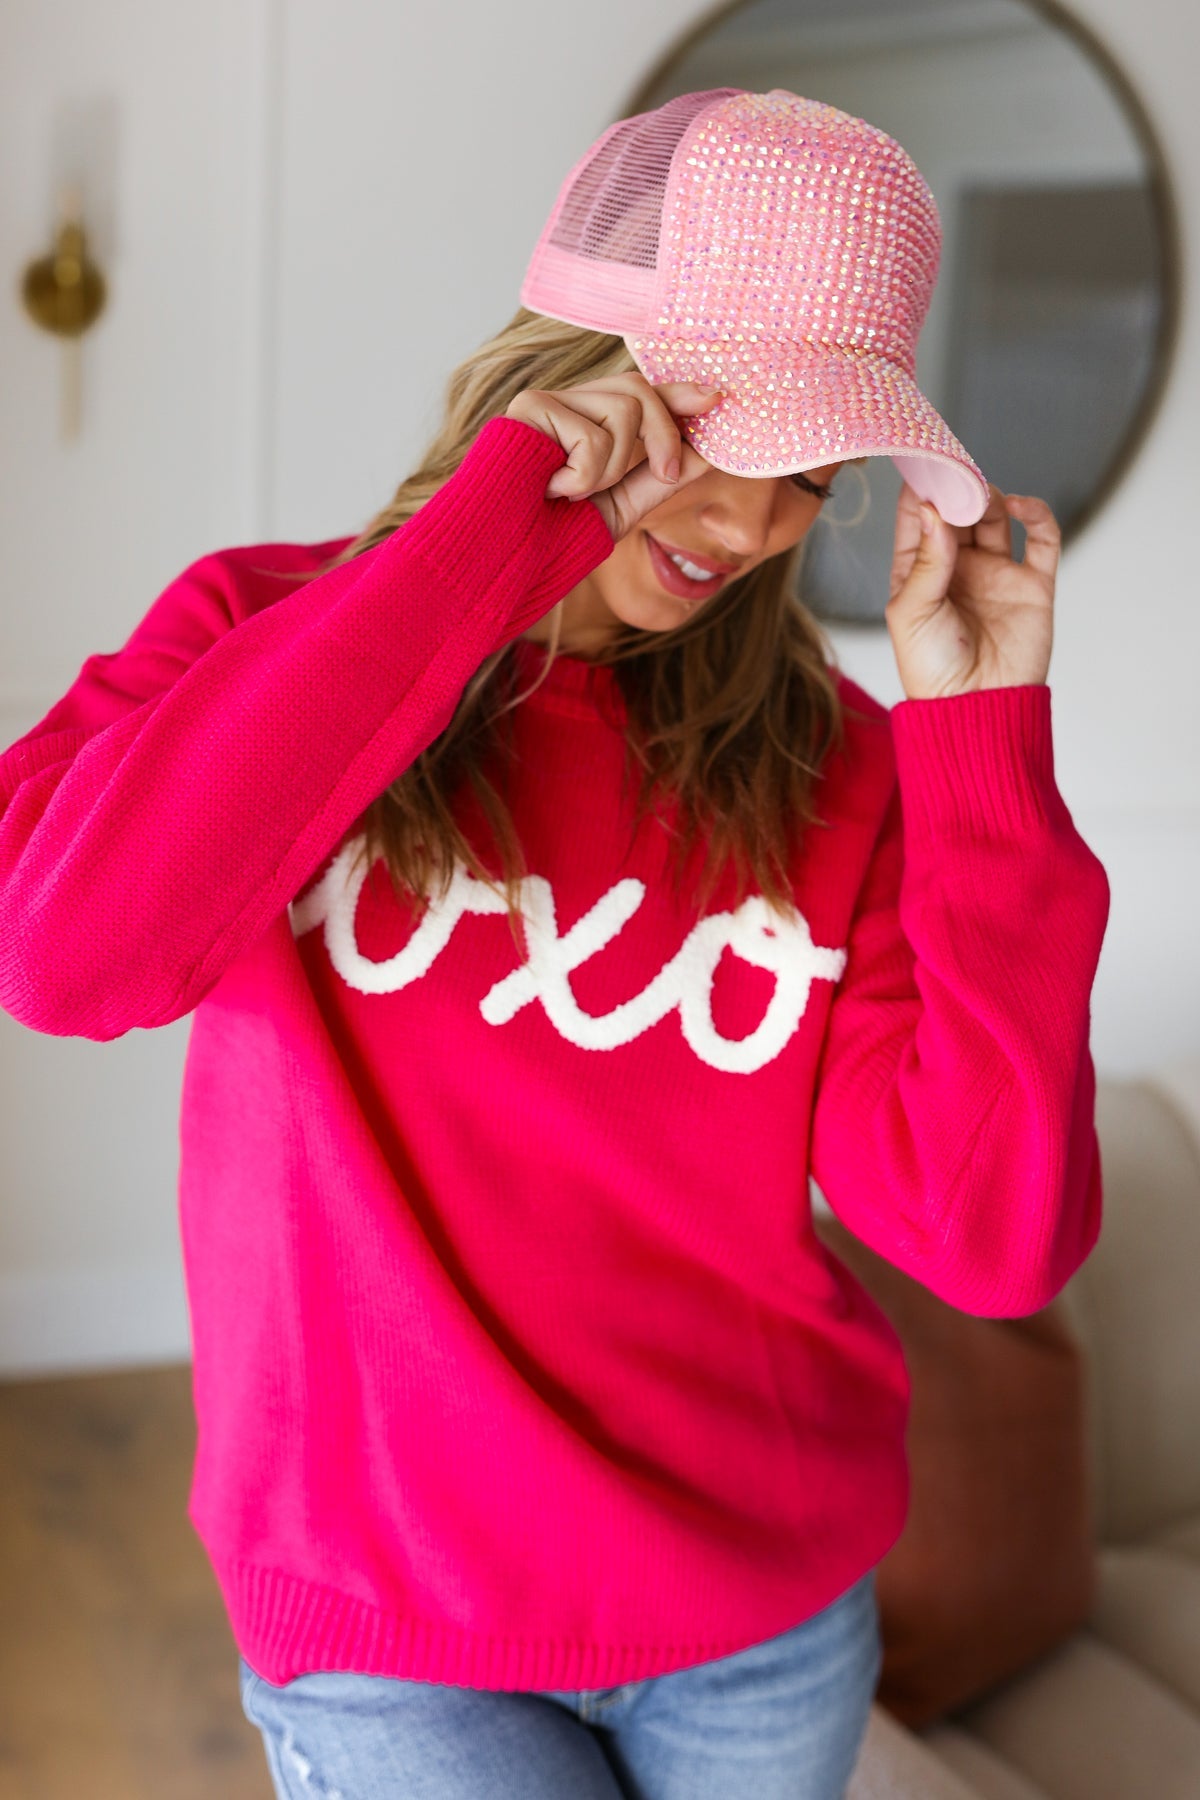 Love In the Air "Xoxo" Embroidered Sweater